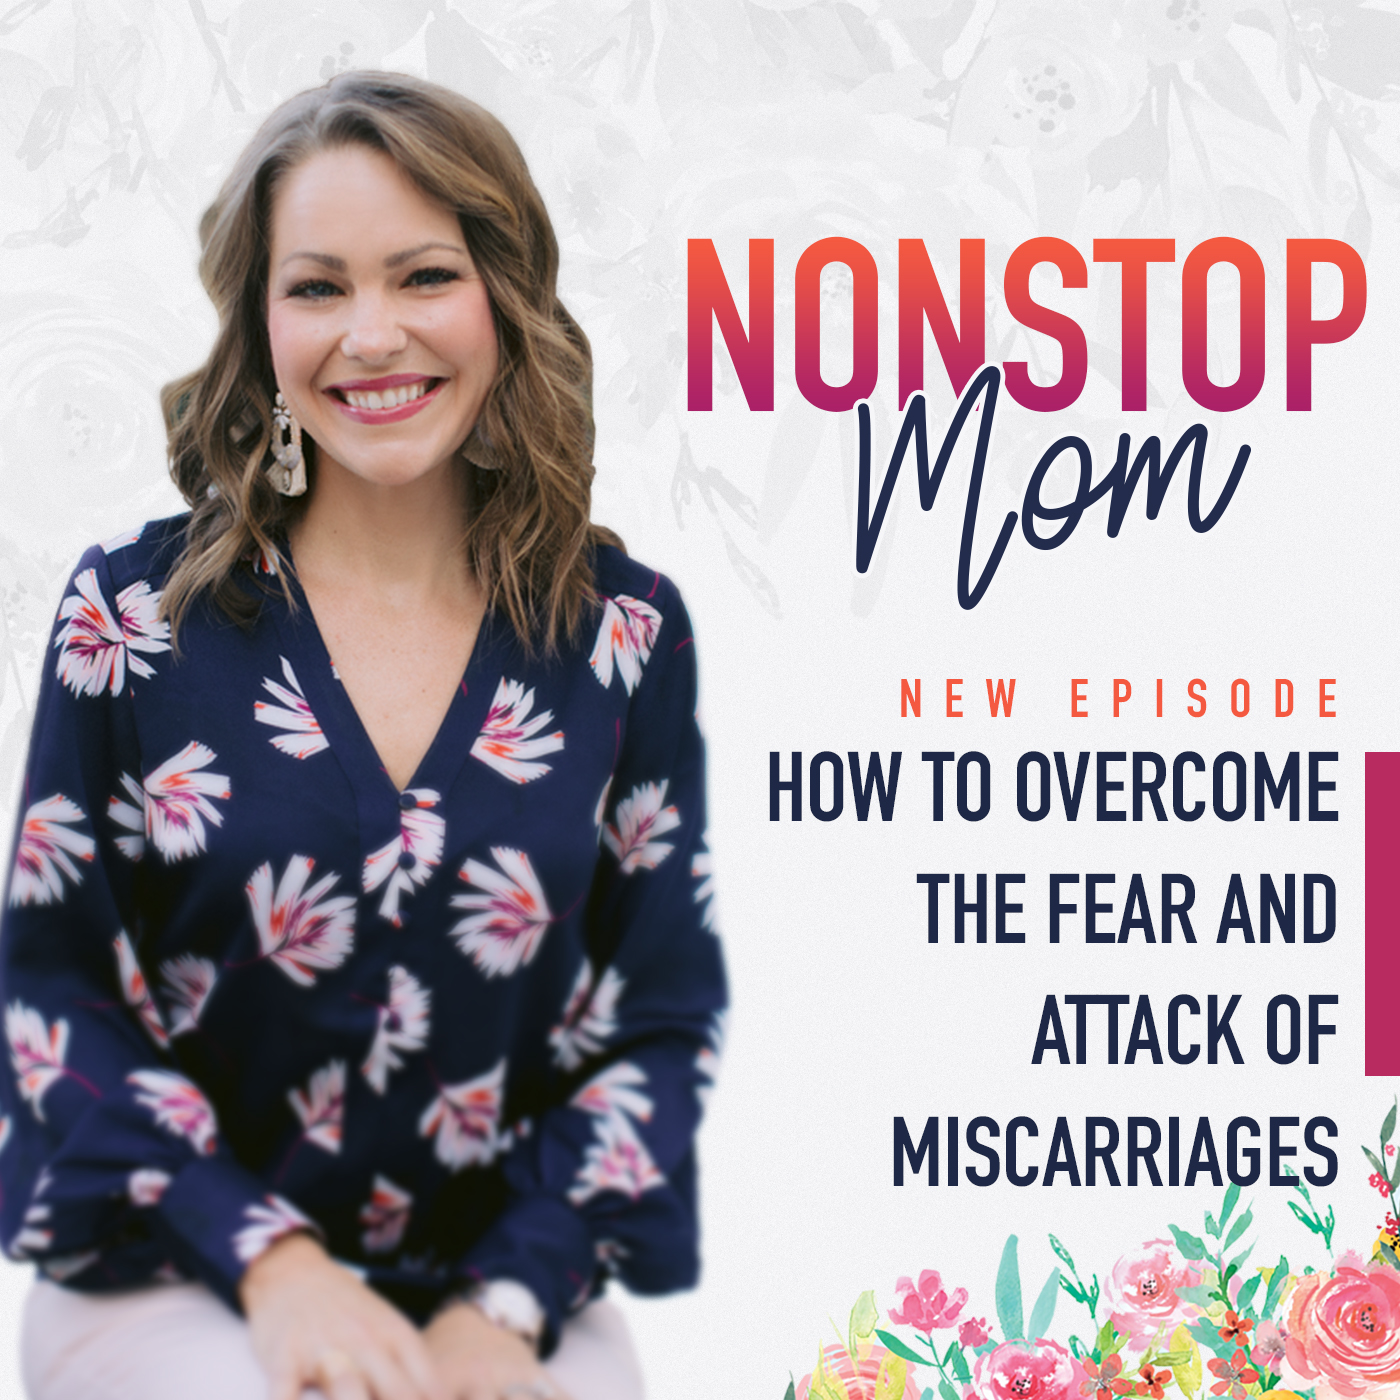 How to Overcome the Fear and Attack of Miscarriages on the Nonstop Mom Podcast